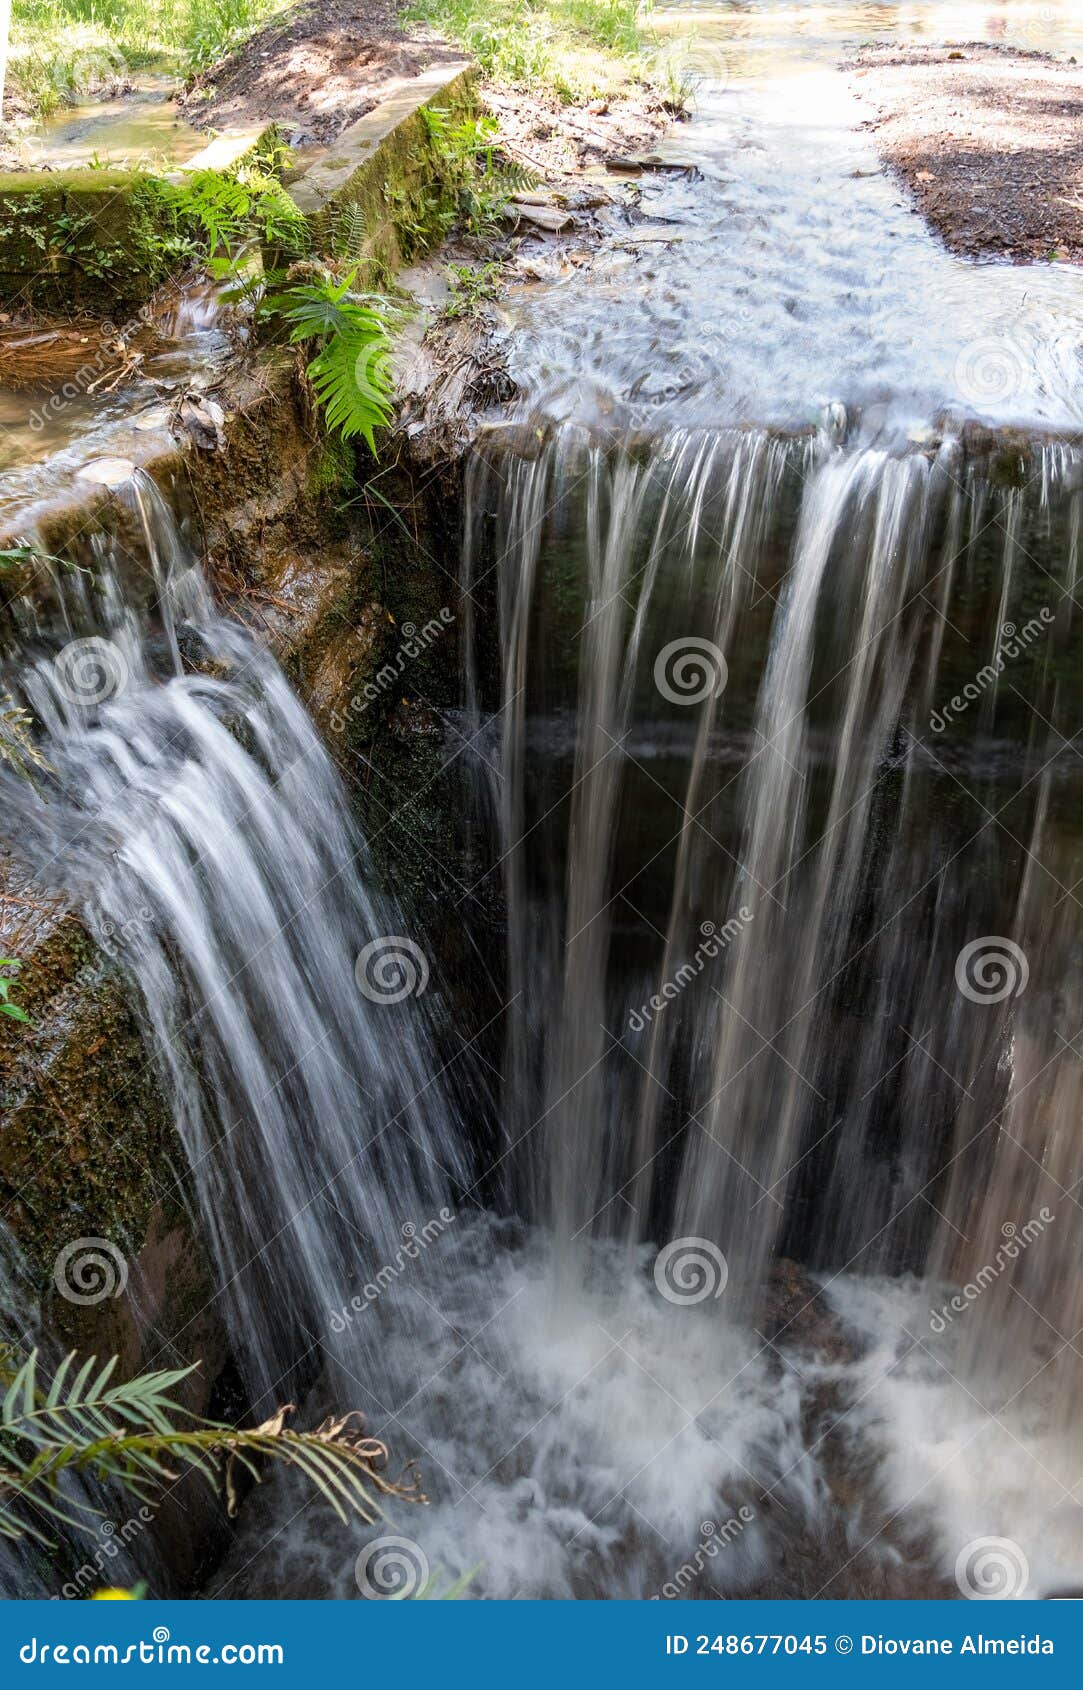 small artificial waterfall, made at the source in parque das ÃÂguas.